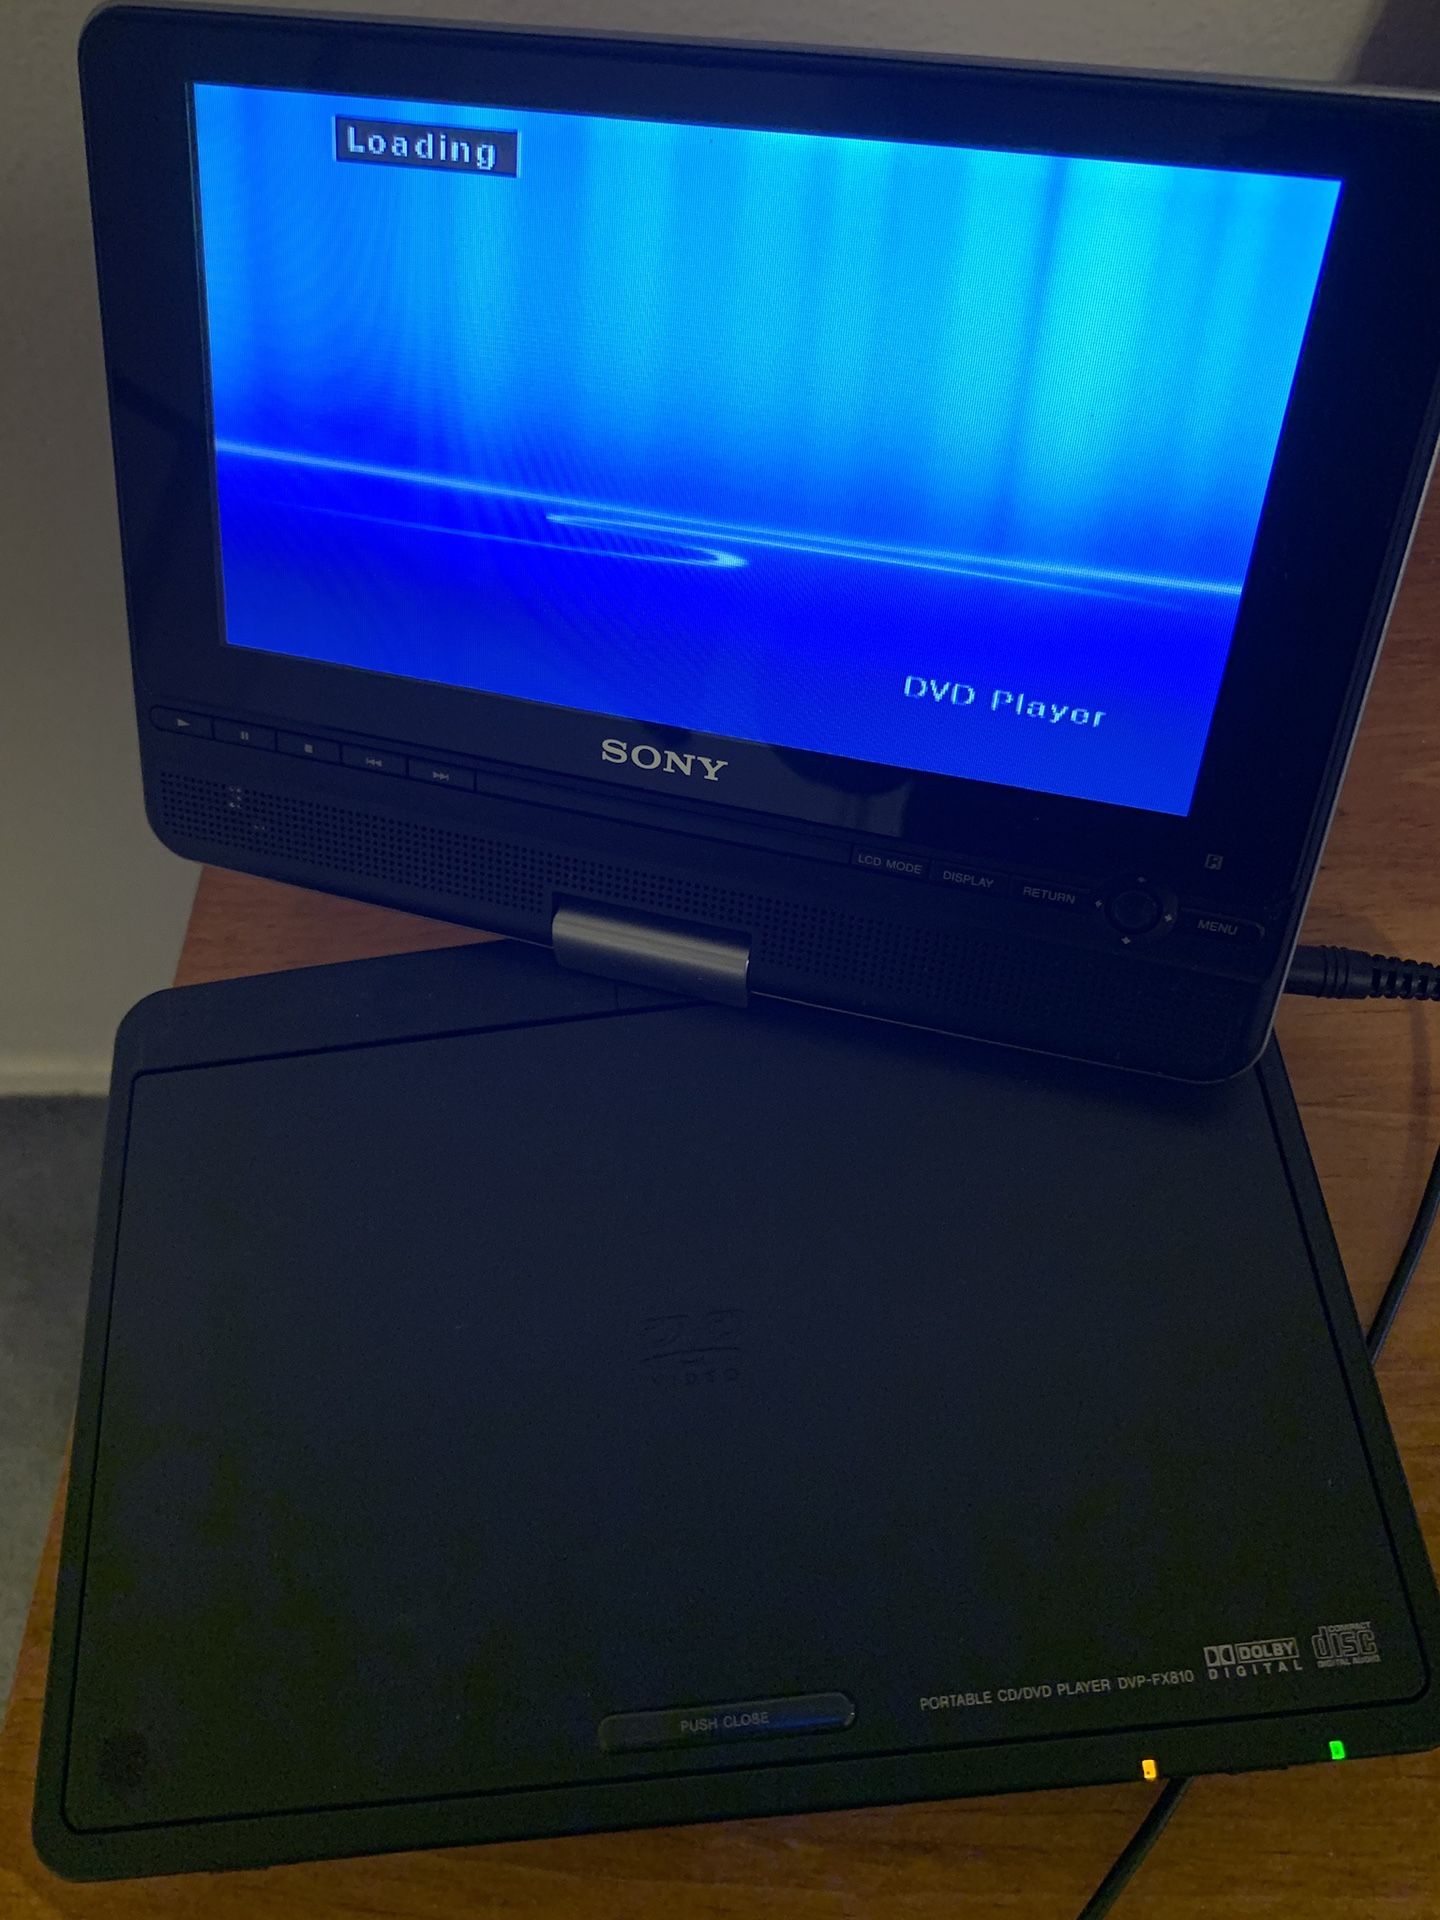 Sony cd/dvd player dvp-fx810 great condition